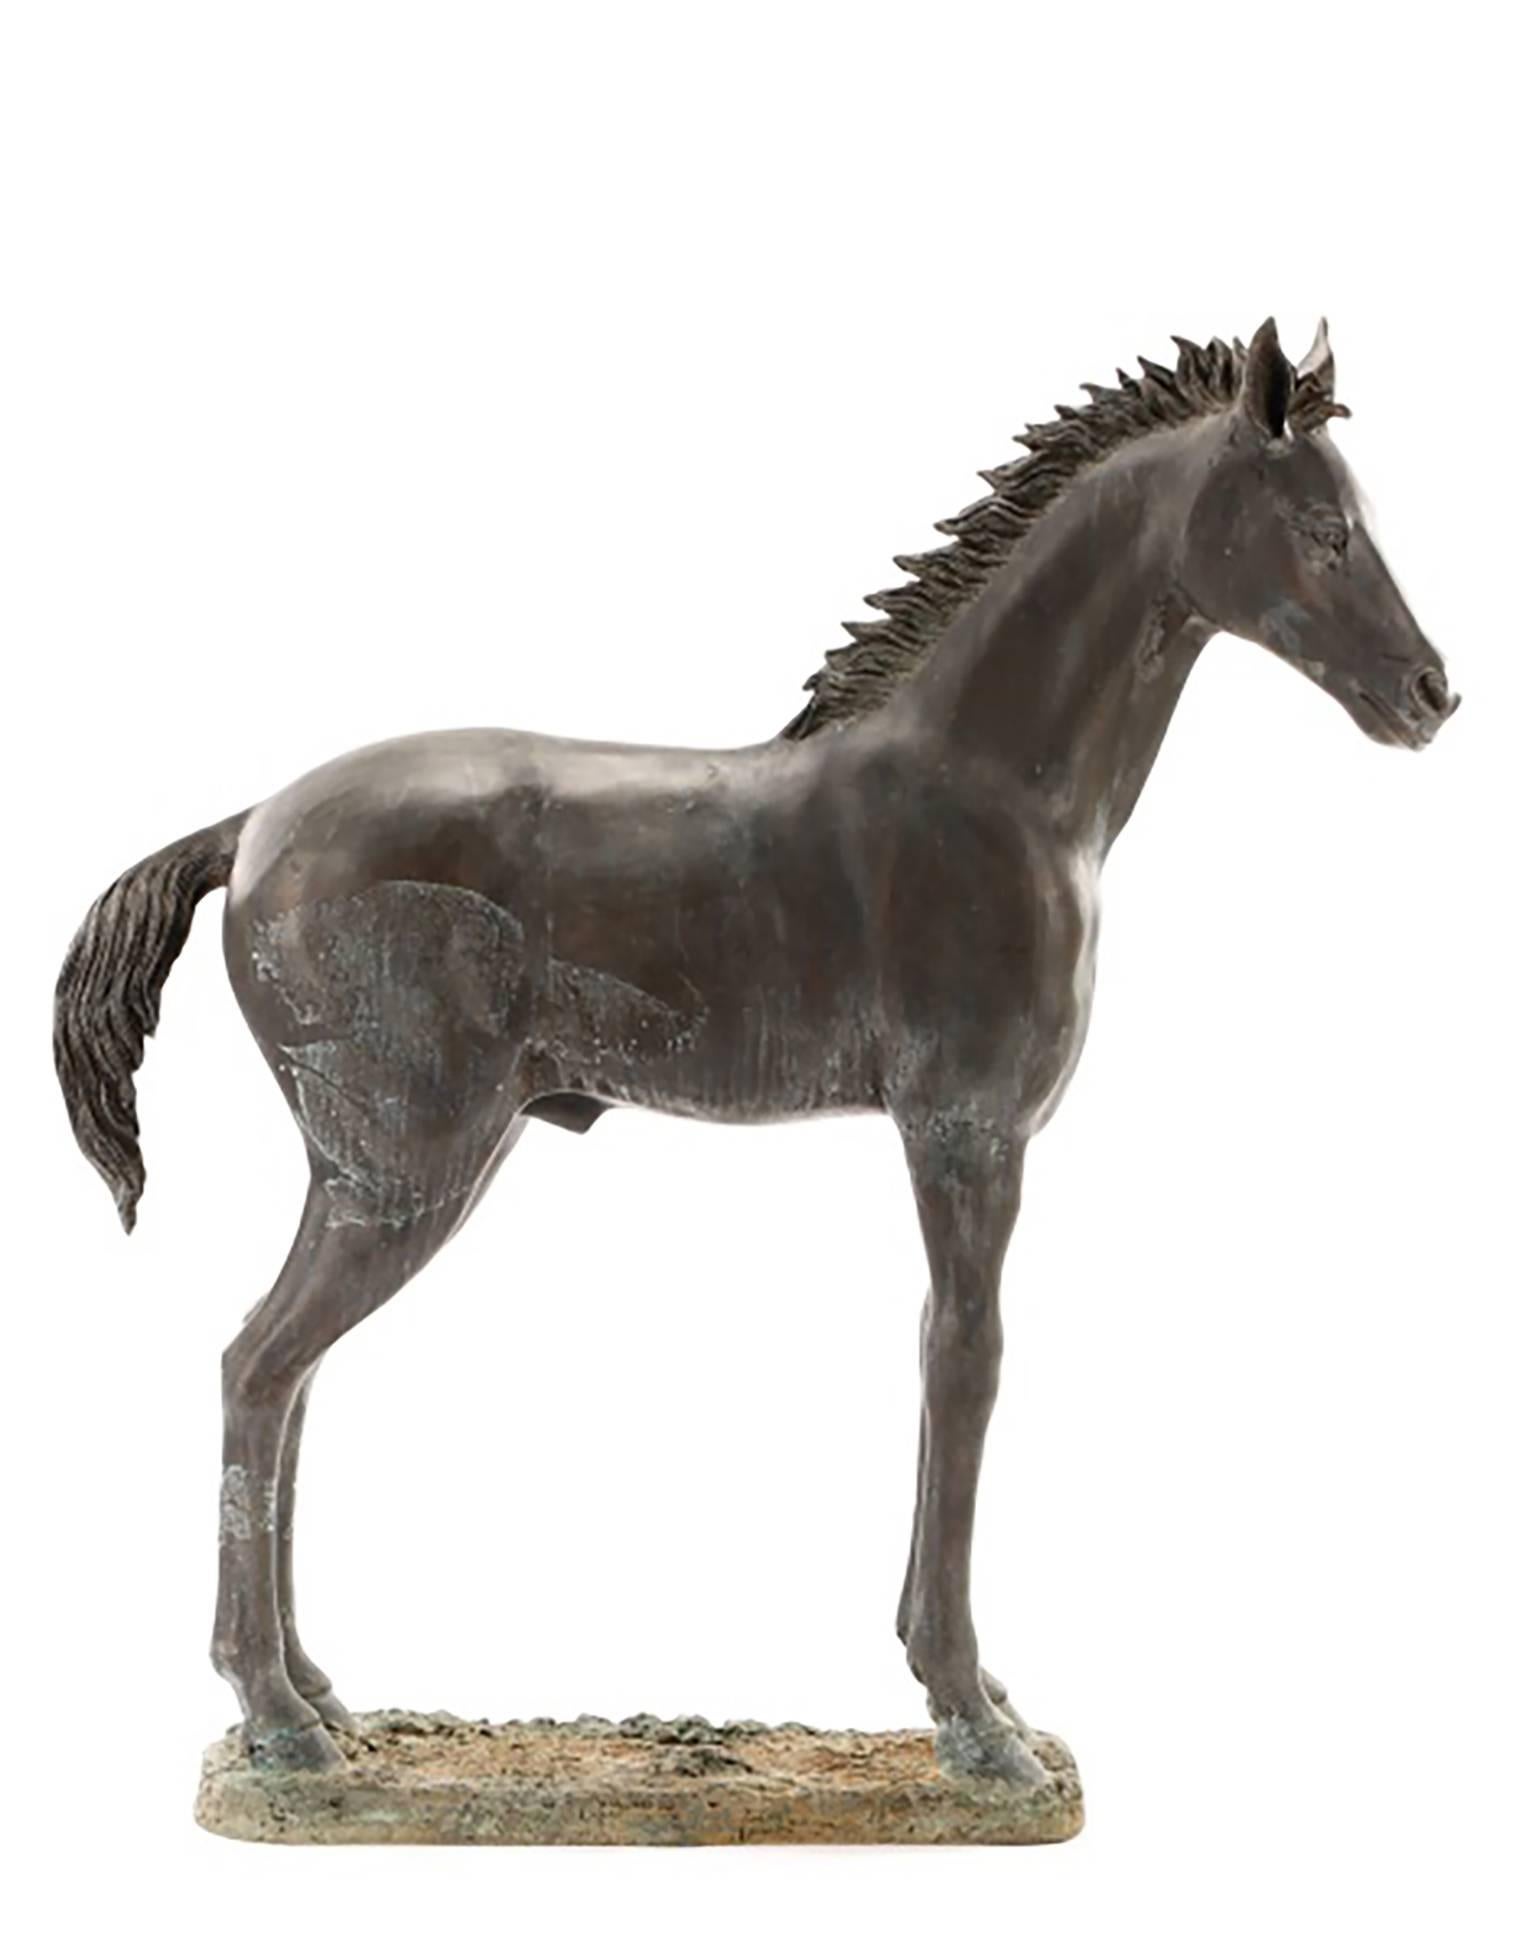 Unknown Figurative Sculpture - Stunning Large Bronze Sculpture of a Standing Horse